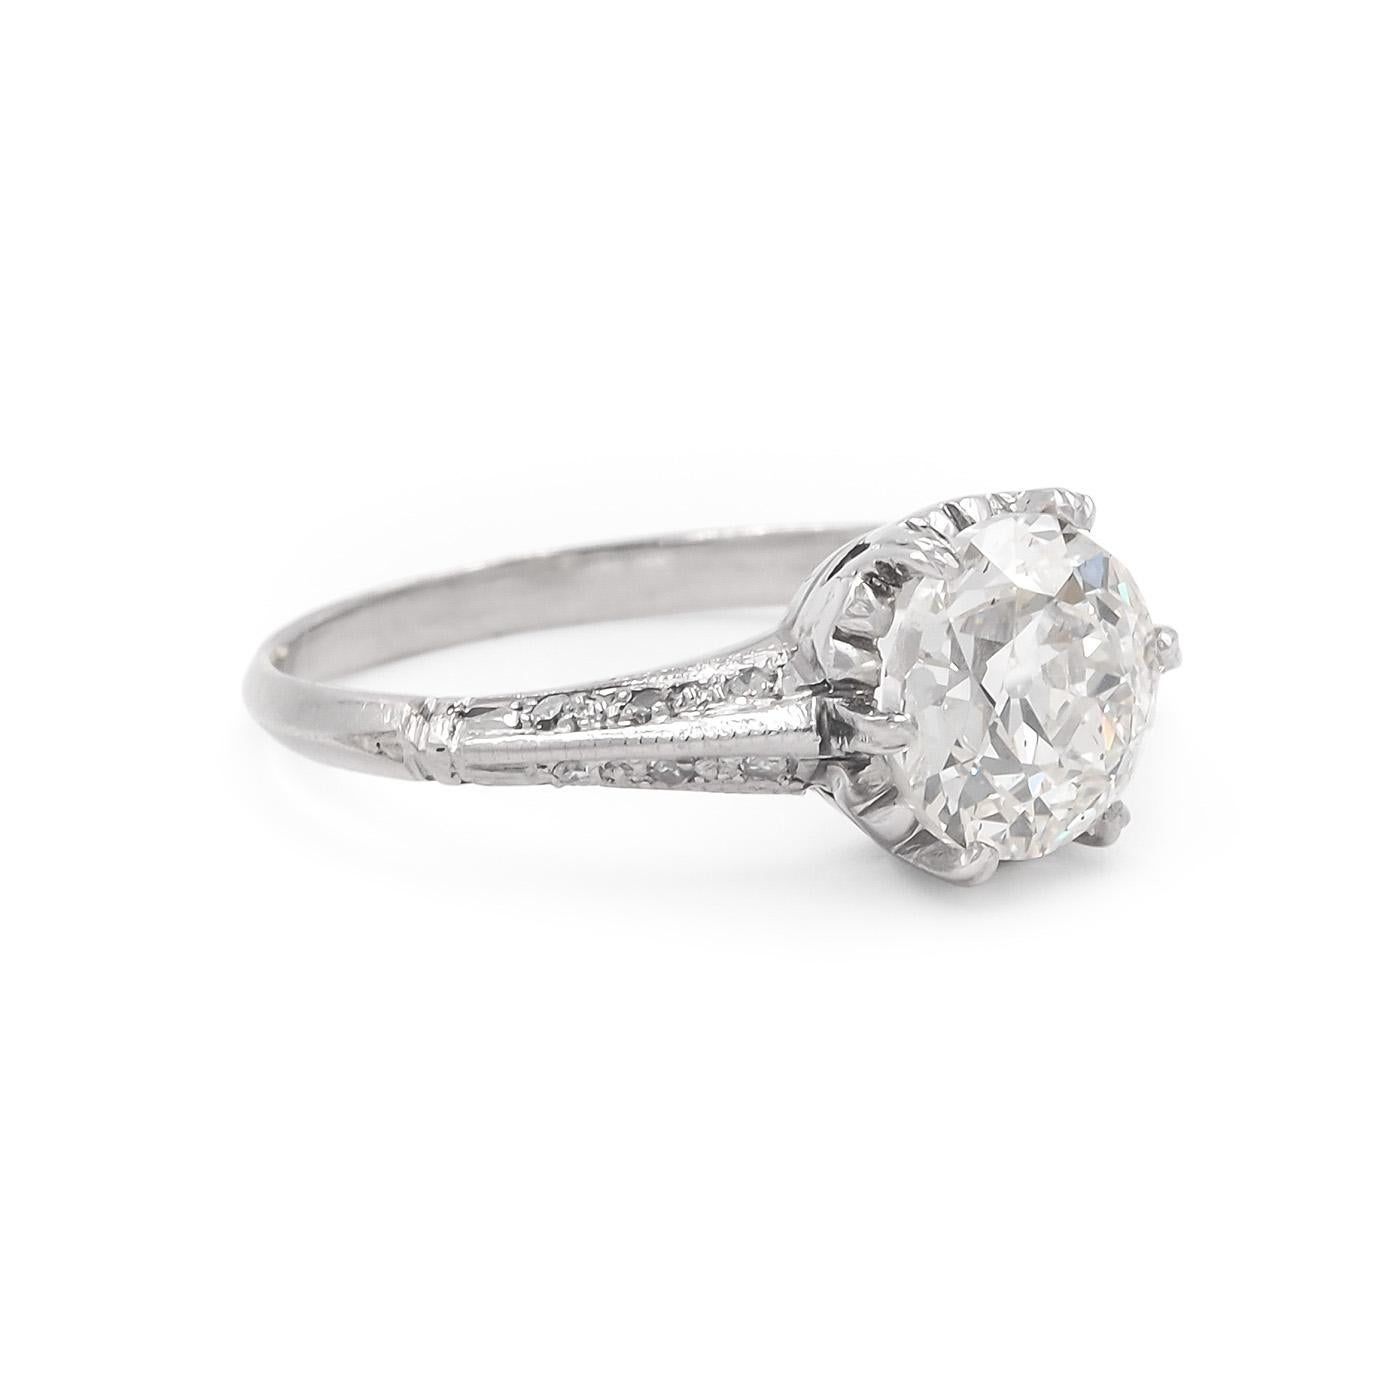 French Belle Epoque (Edwardian) Era Old European Cut Diamond Solitaire Engagement Ring composed of platinum. The 2.00 carat Old European Cut diamond is GIA certified L color & SI2 clarity, set within a multi-claw prong buttercup-style mounting. With